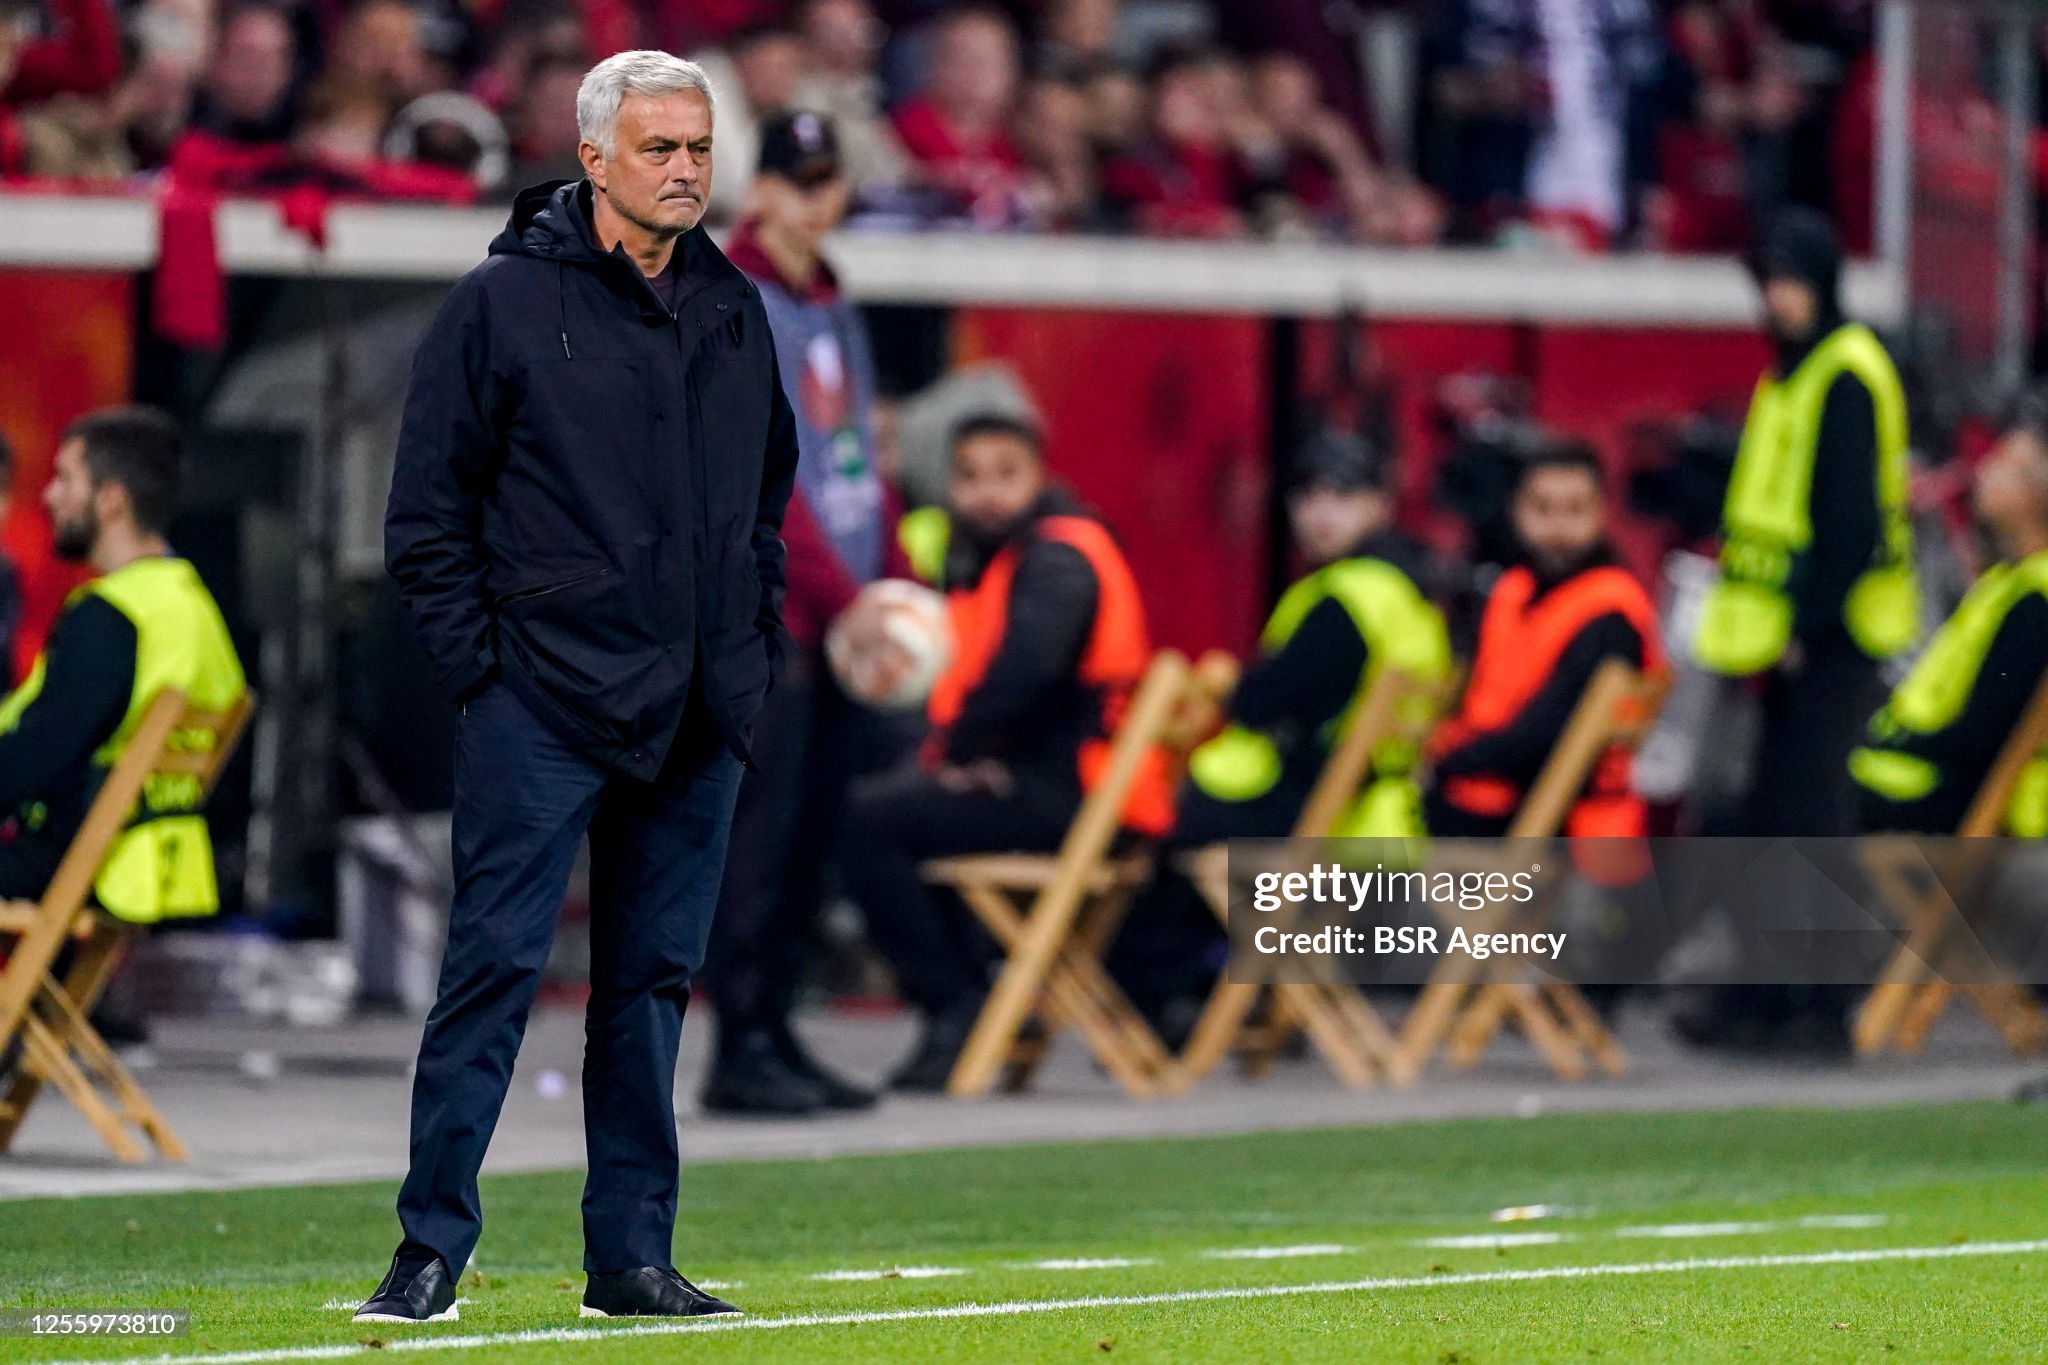 Mourinho disregards criticism: 'Always looking for an excuse'